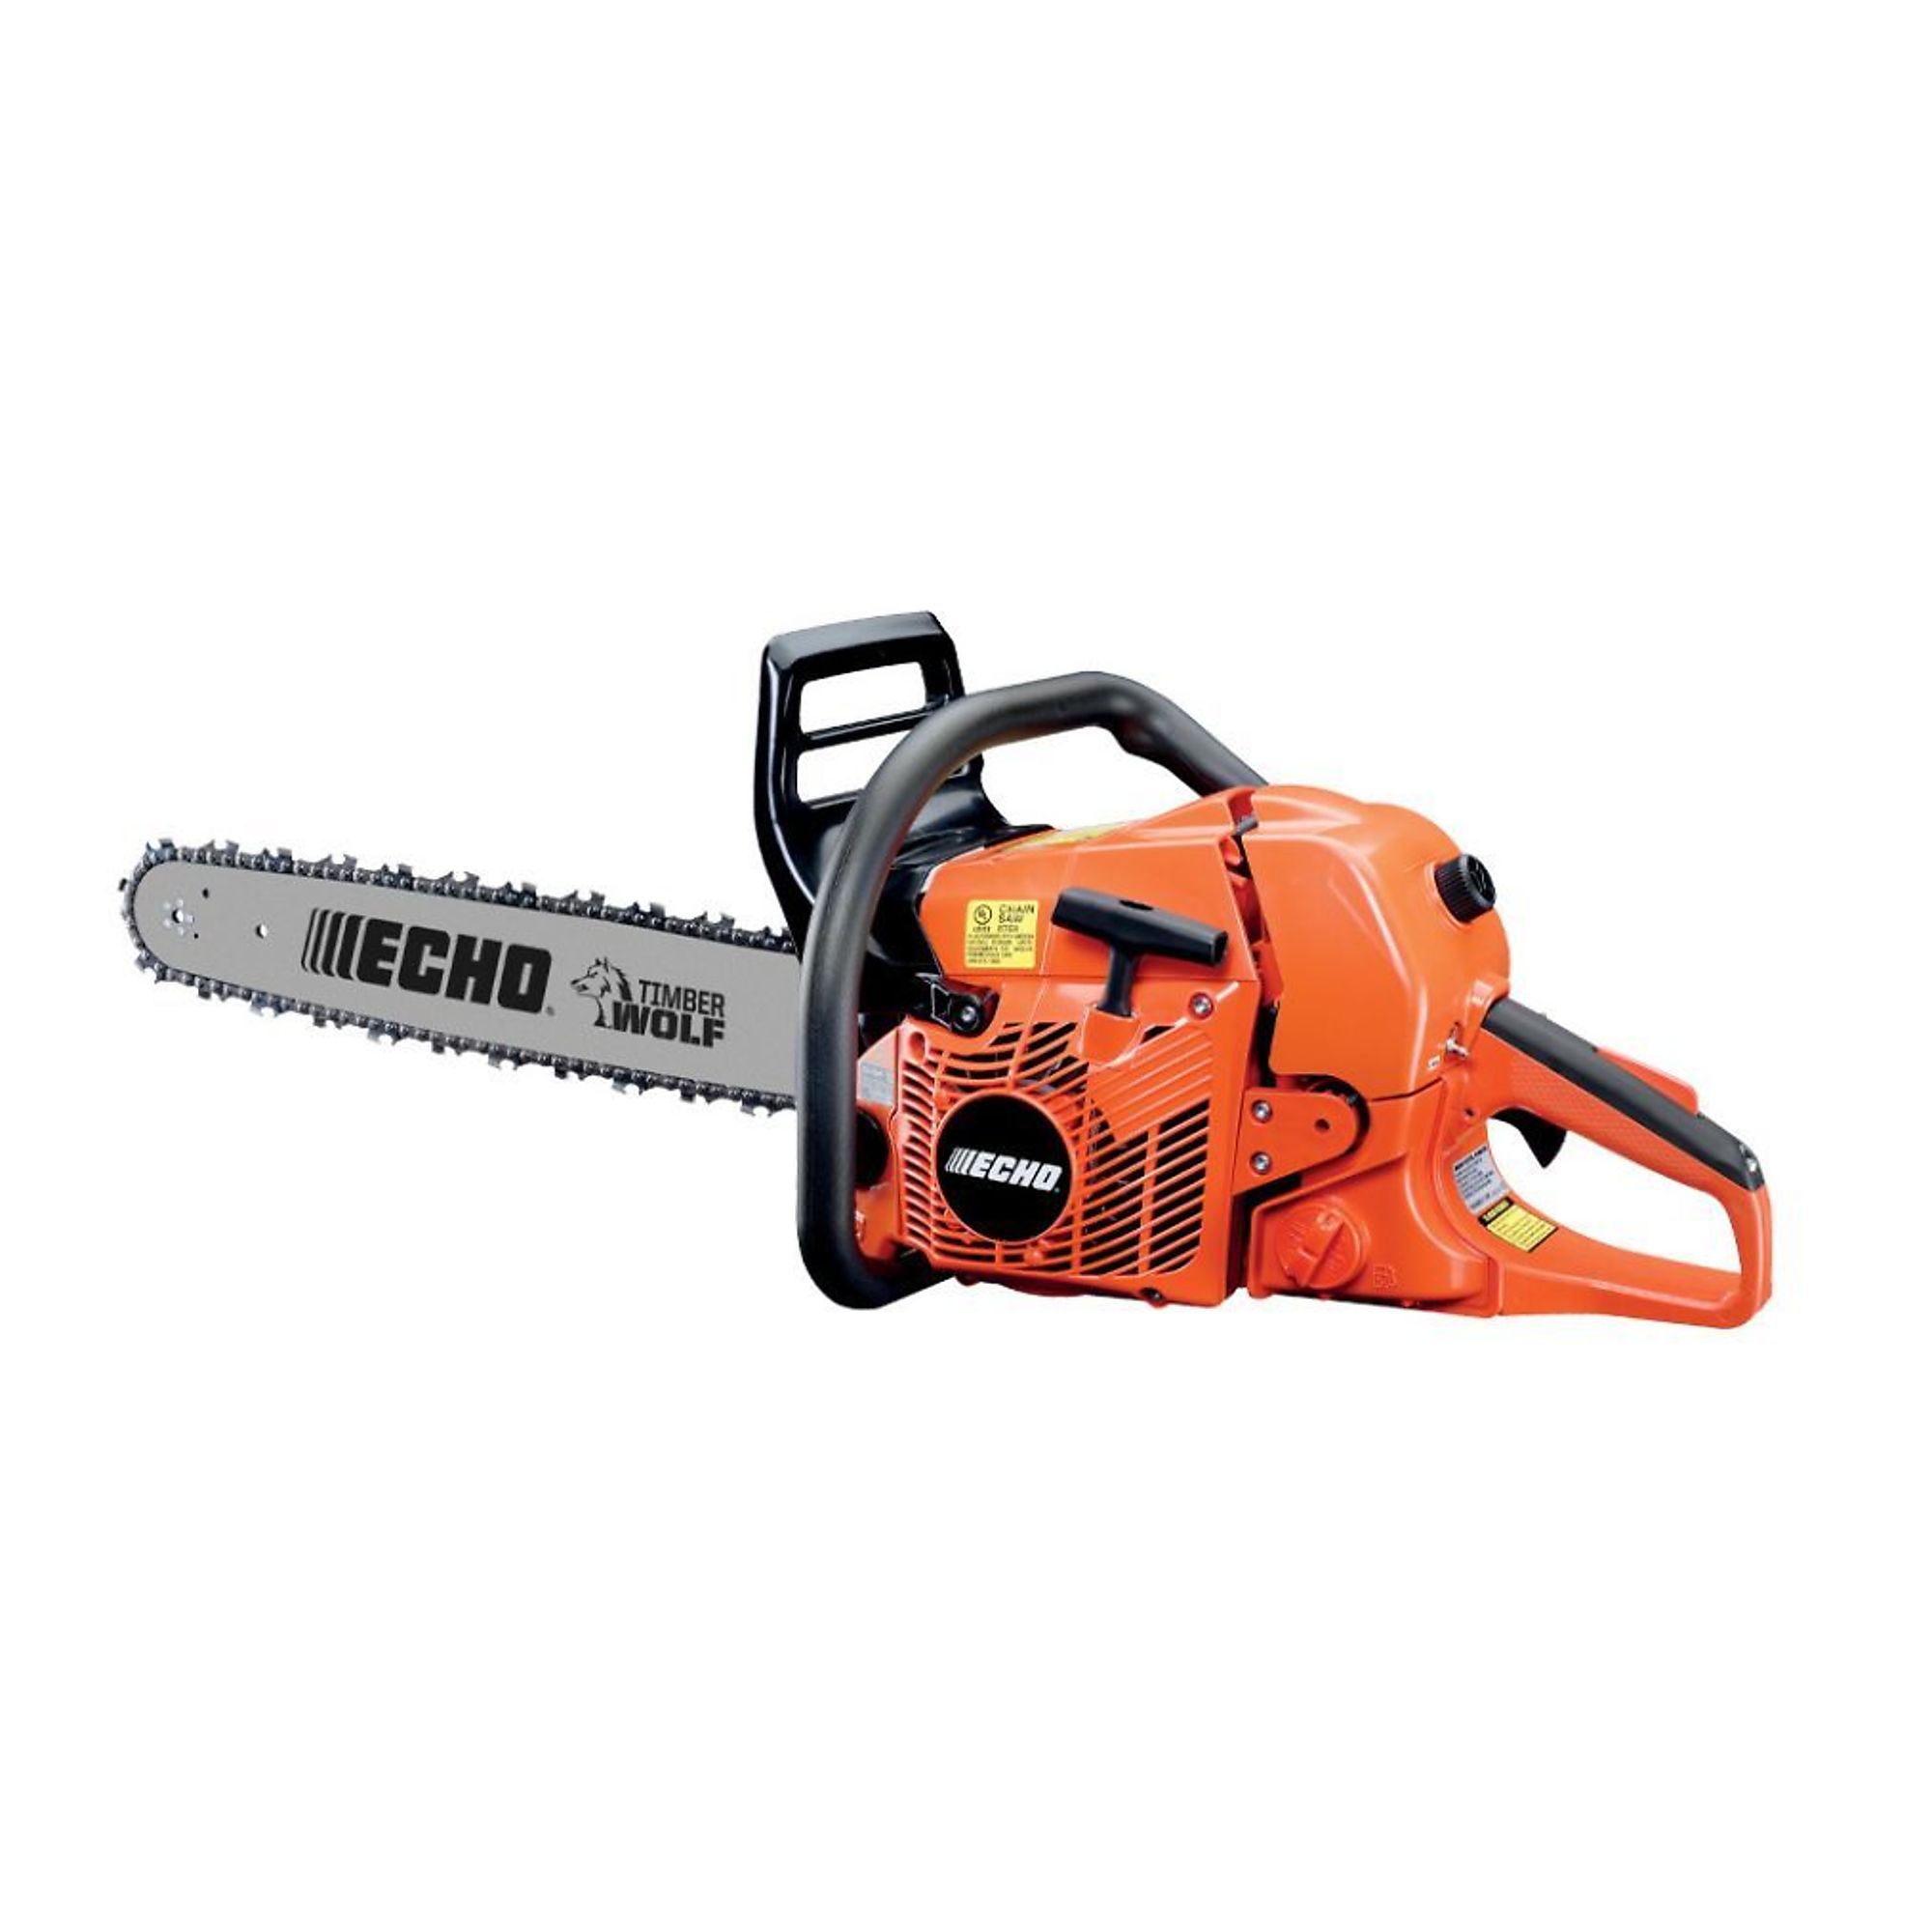 ECHO, Gas-Powered Rear Handle Timber Wolf Chainsaw, Bar Length 20 in, Engine Displacement 59.8 cc, Model CS-590-20